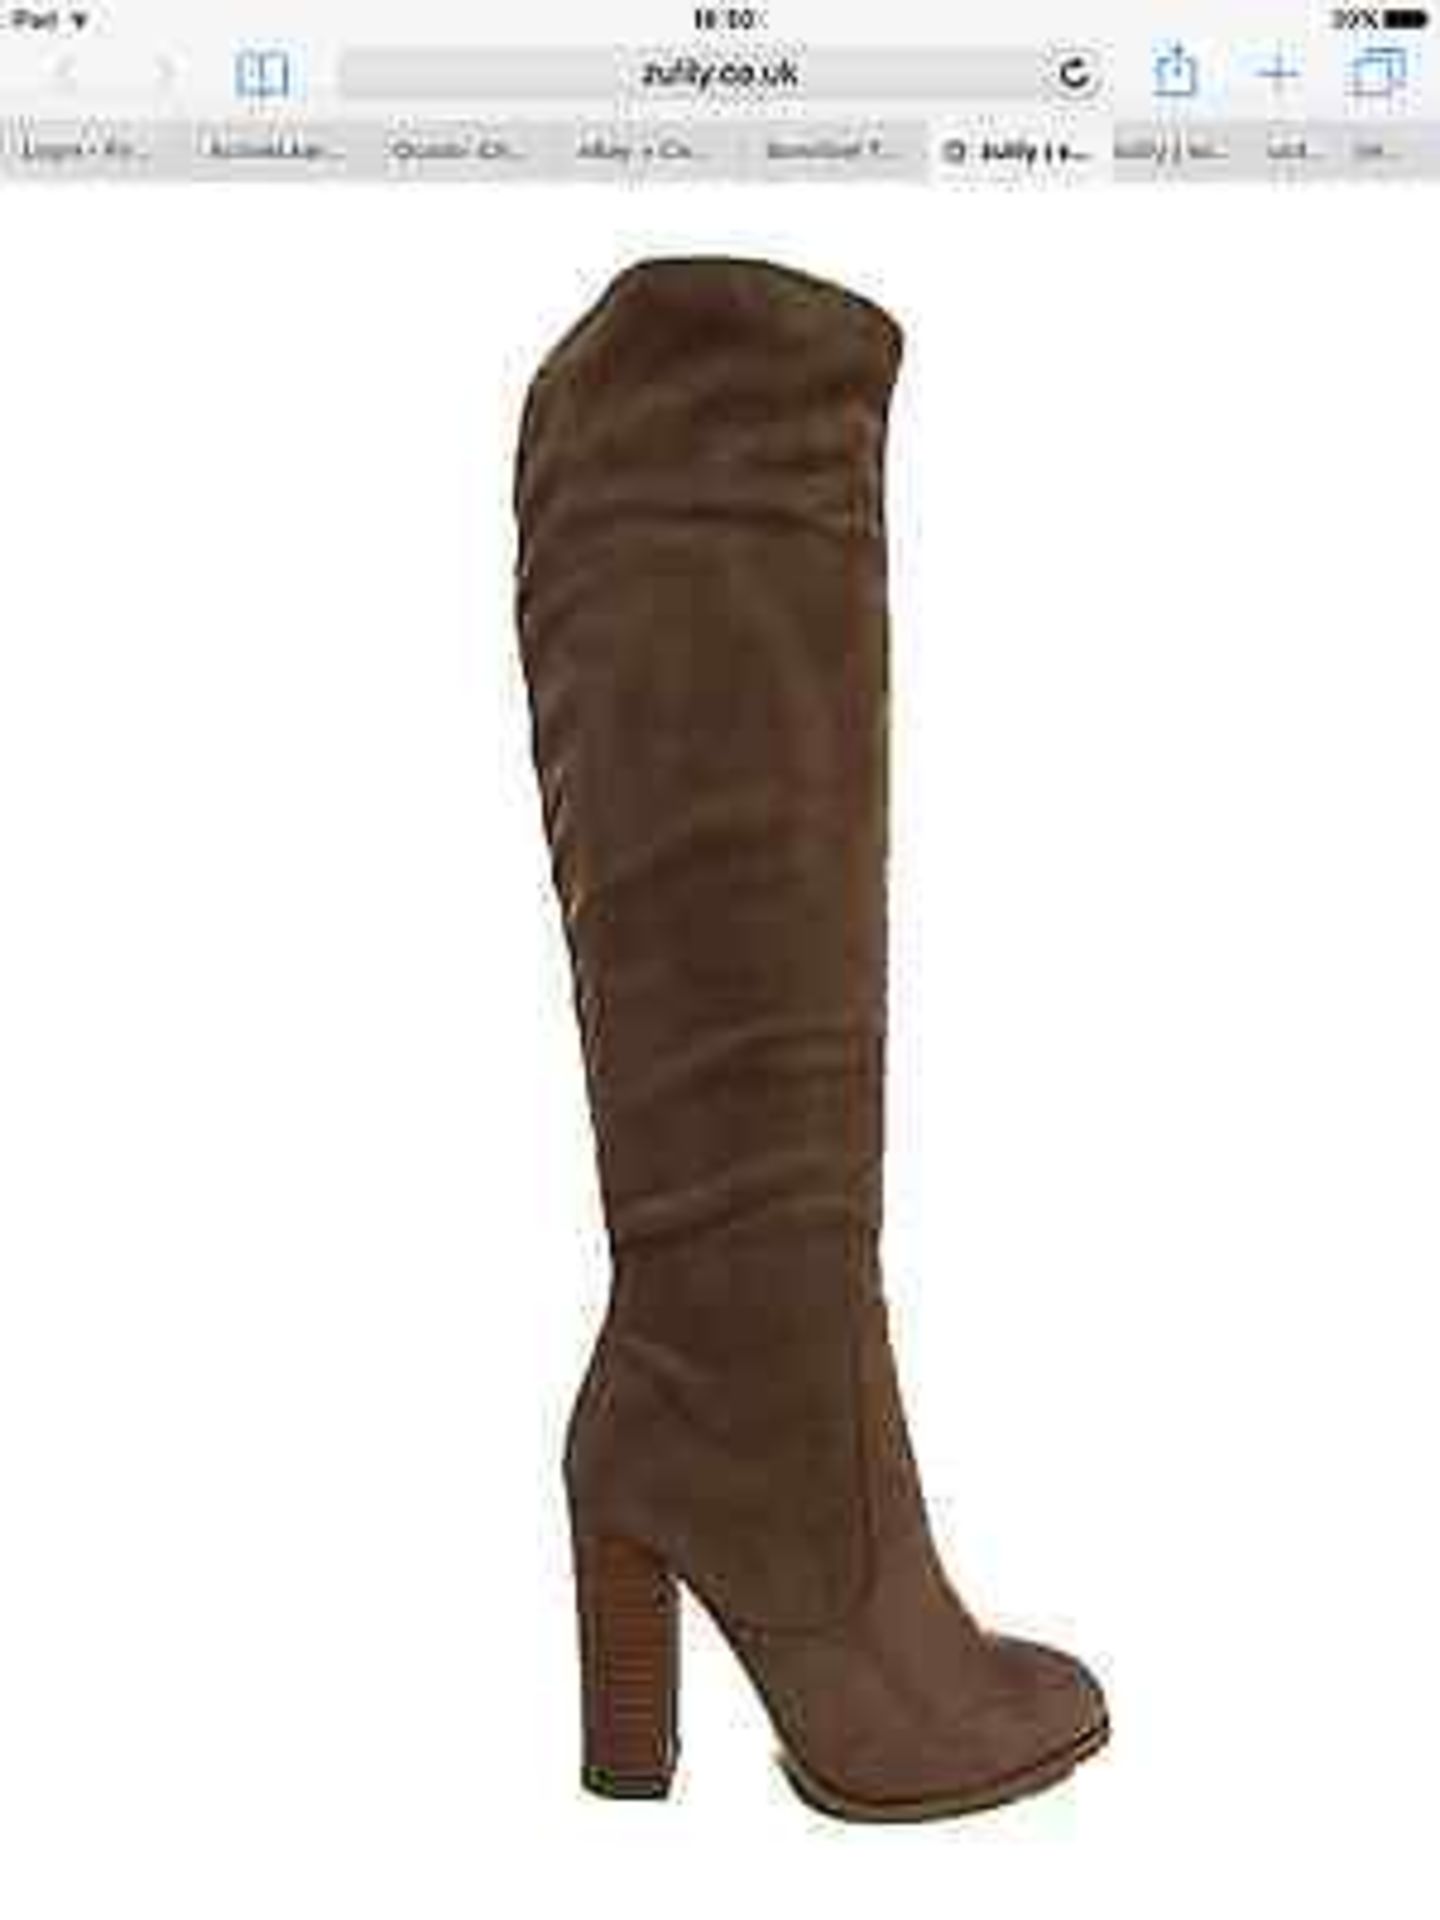 X2B Taupe Baina Boot, Size 6.5-7 (New with box)